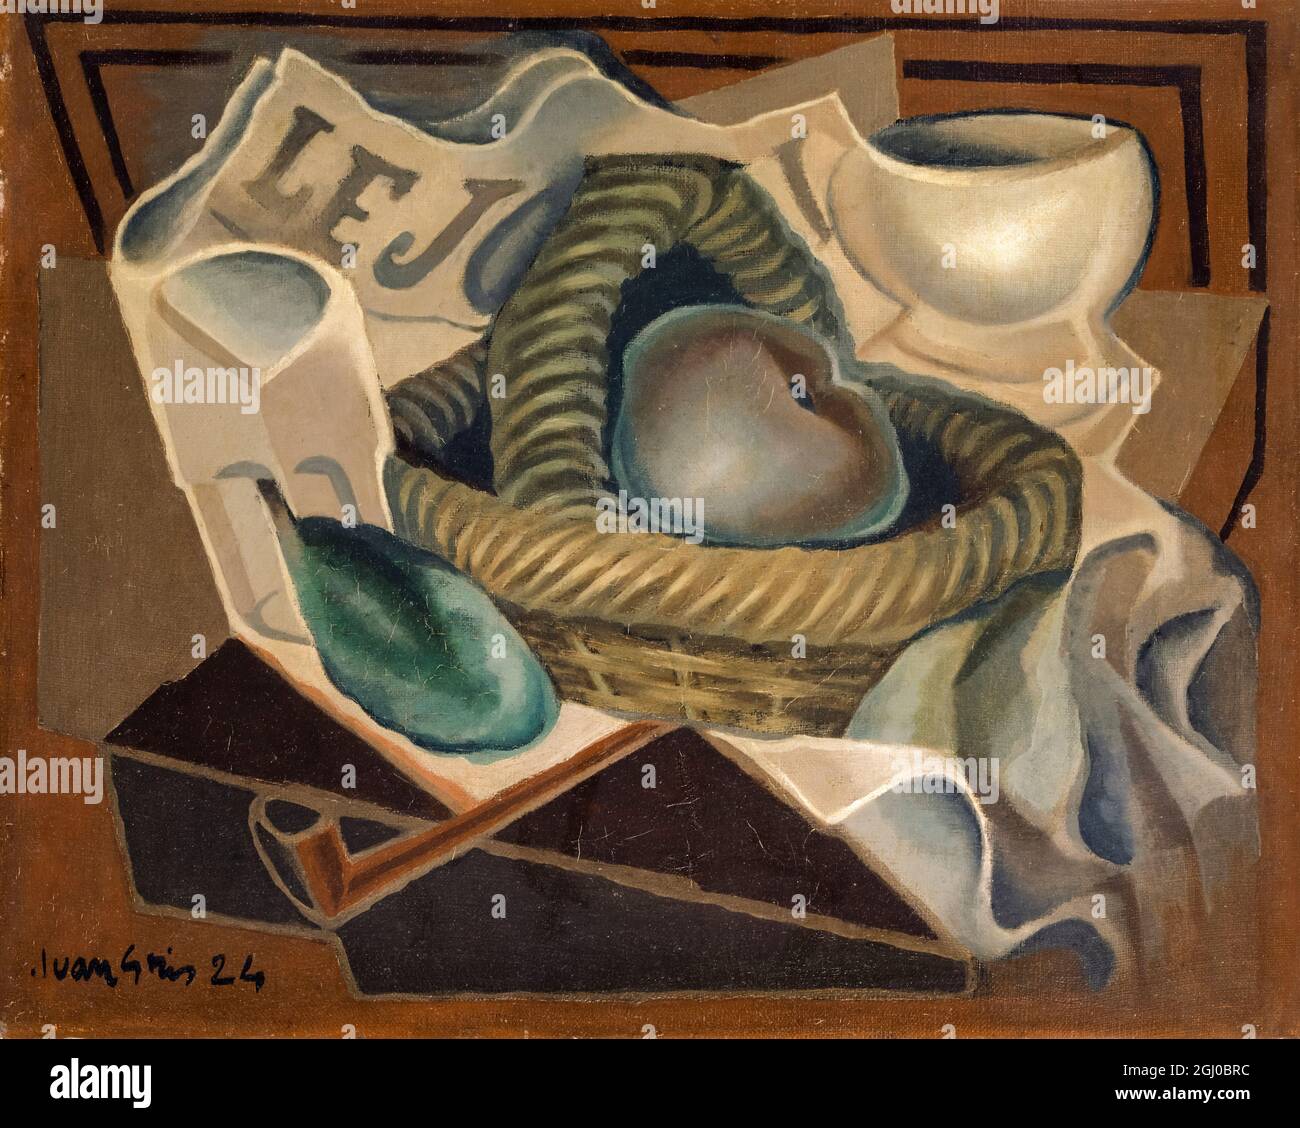 Juan Gris, The Basket, abstract painting, 1924 Stock Photo